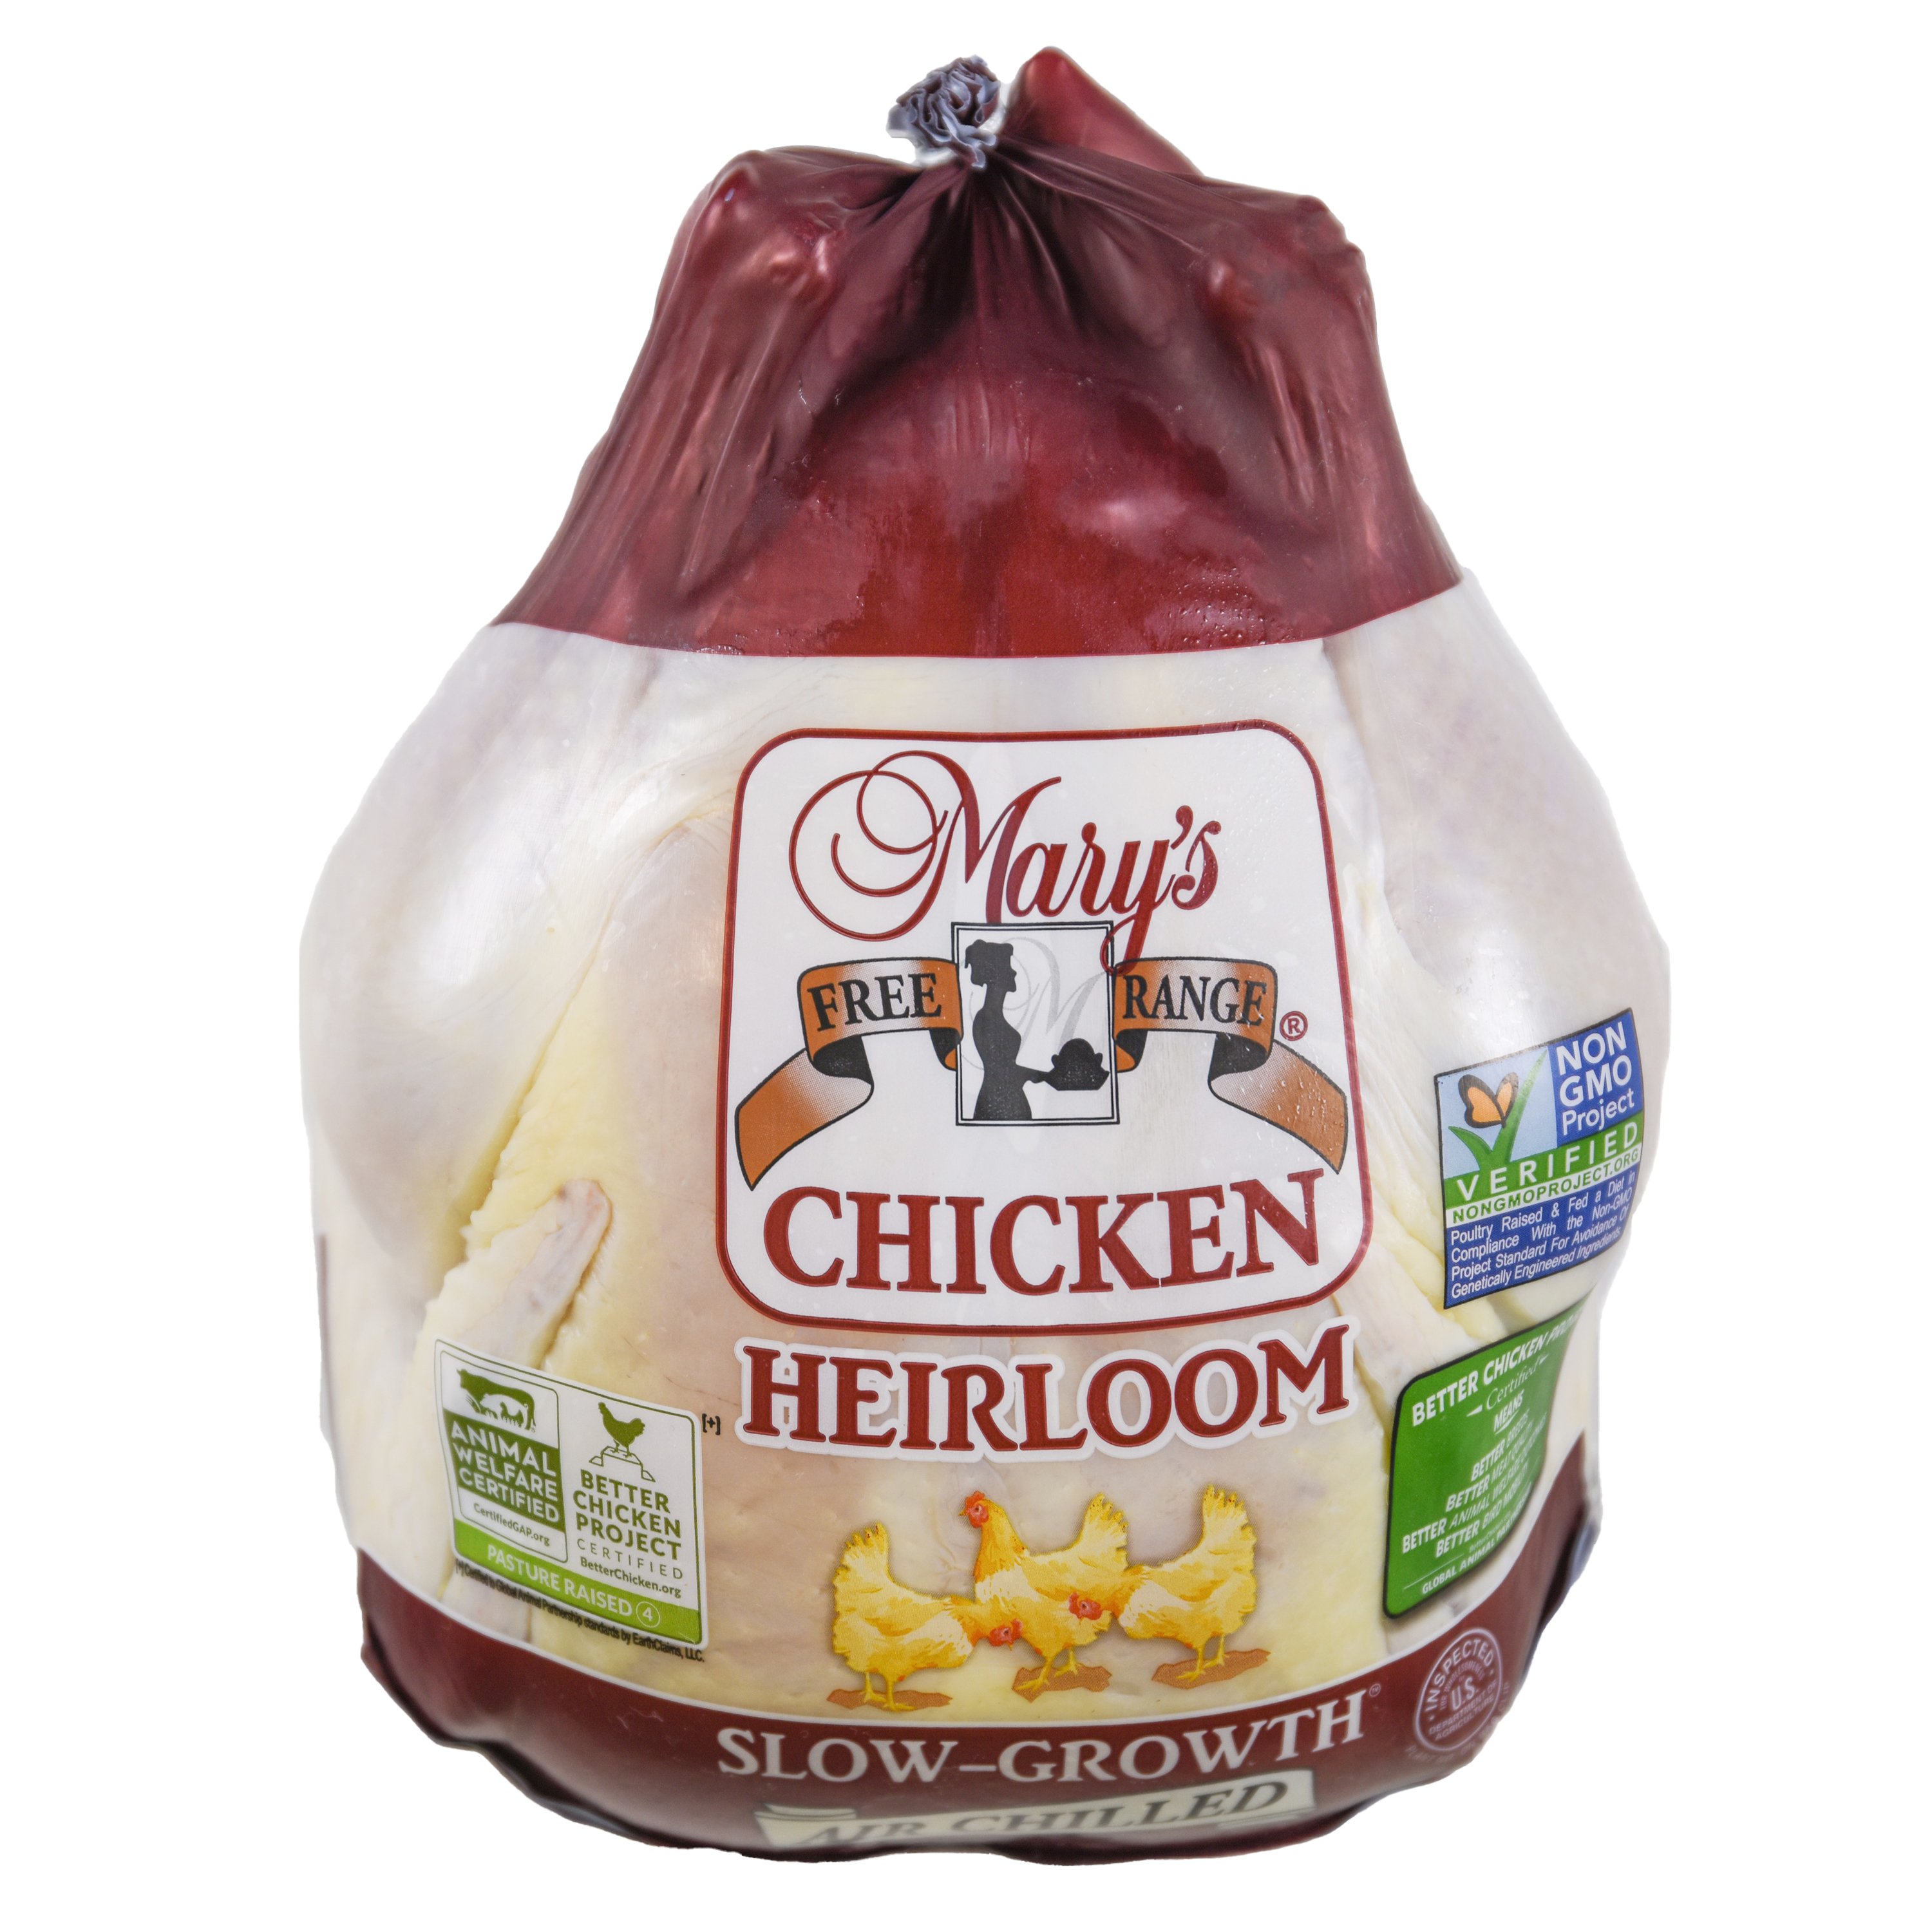 All Natural Heirloom Whole Chicken